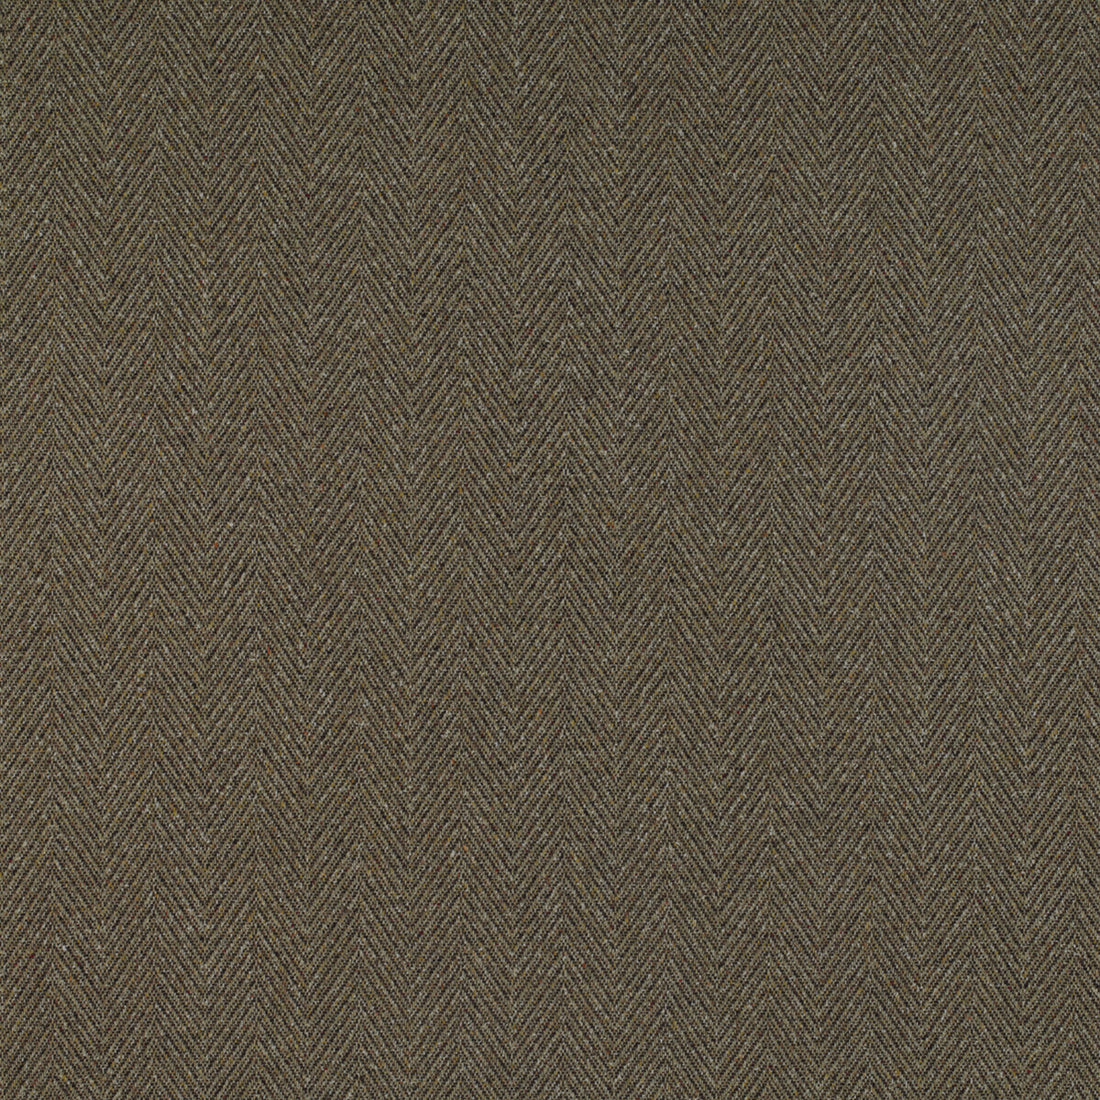 Bolzano fabric in amarillo/chocolate color - pattern GDT5319.008.0 - by Gaston y Daniela in the Tierras collection